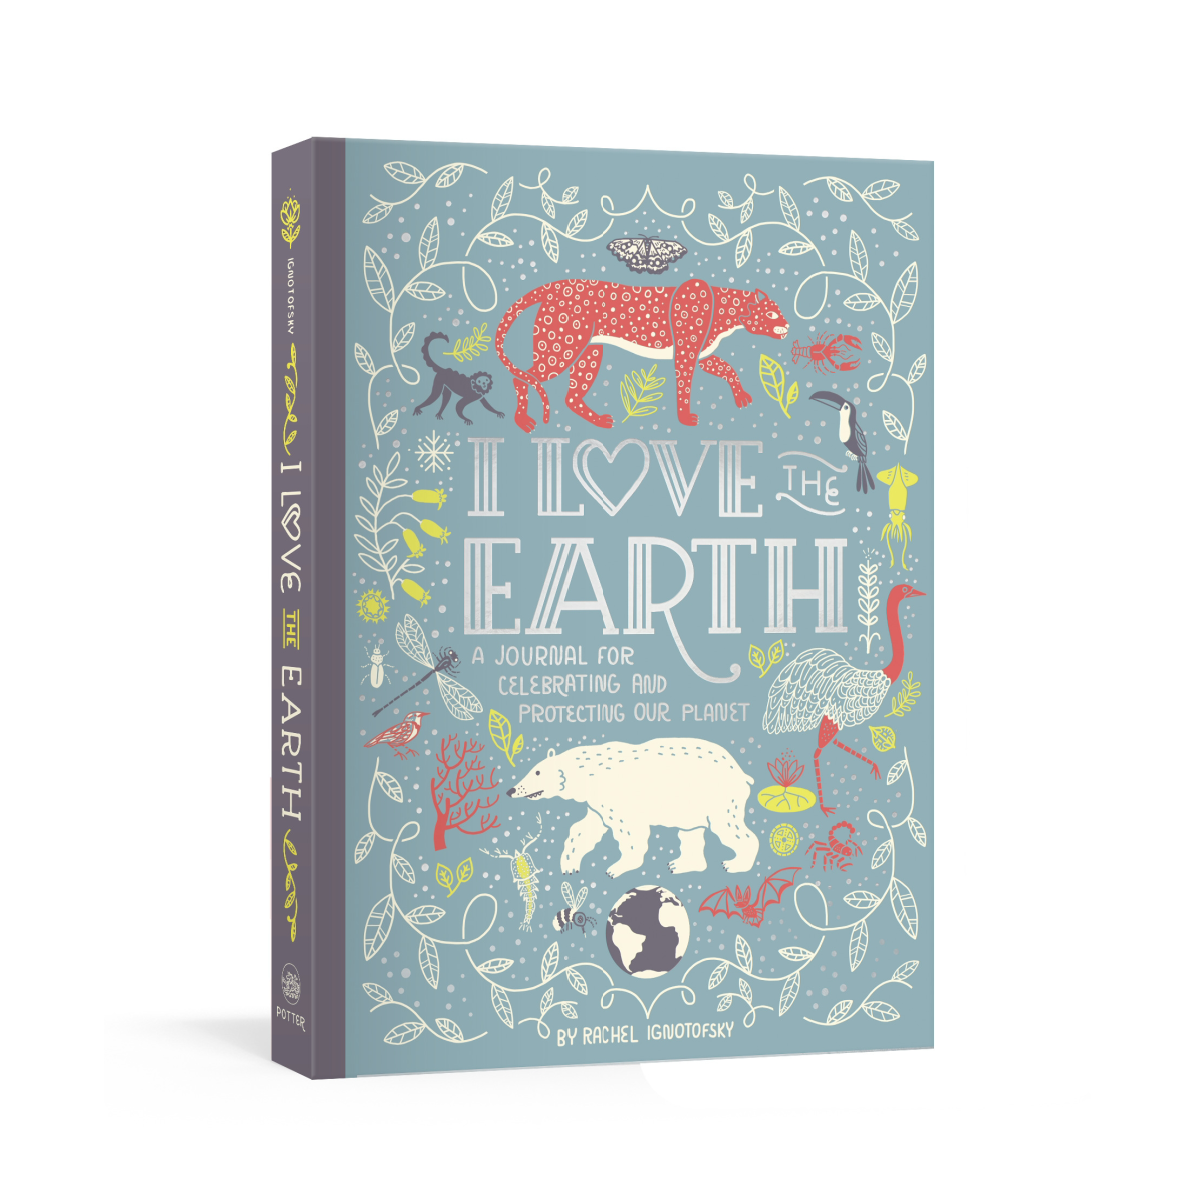 I Love the Earth - A Journal for Celebrating and Protecting Our Planet